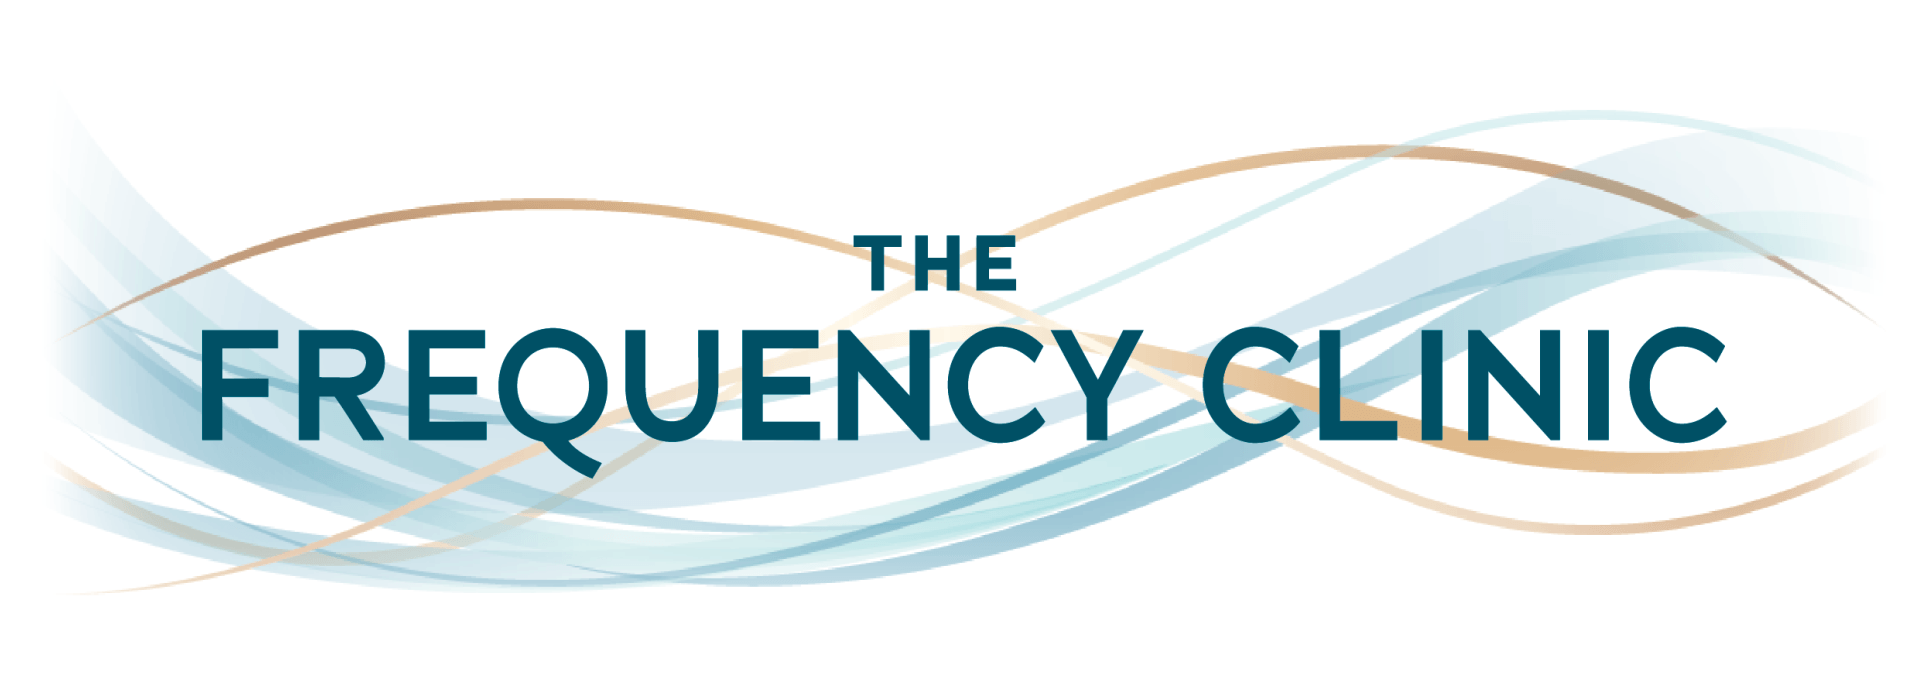 The Frequency Clinic Logo